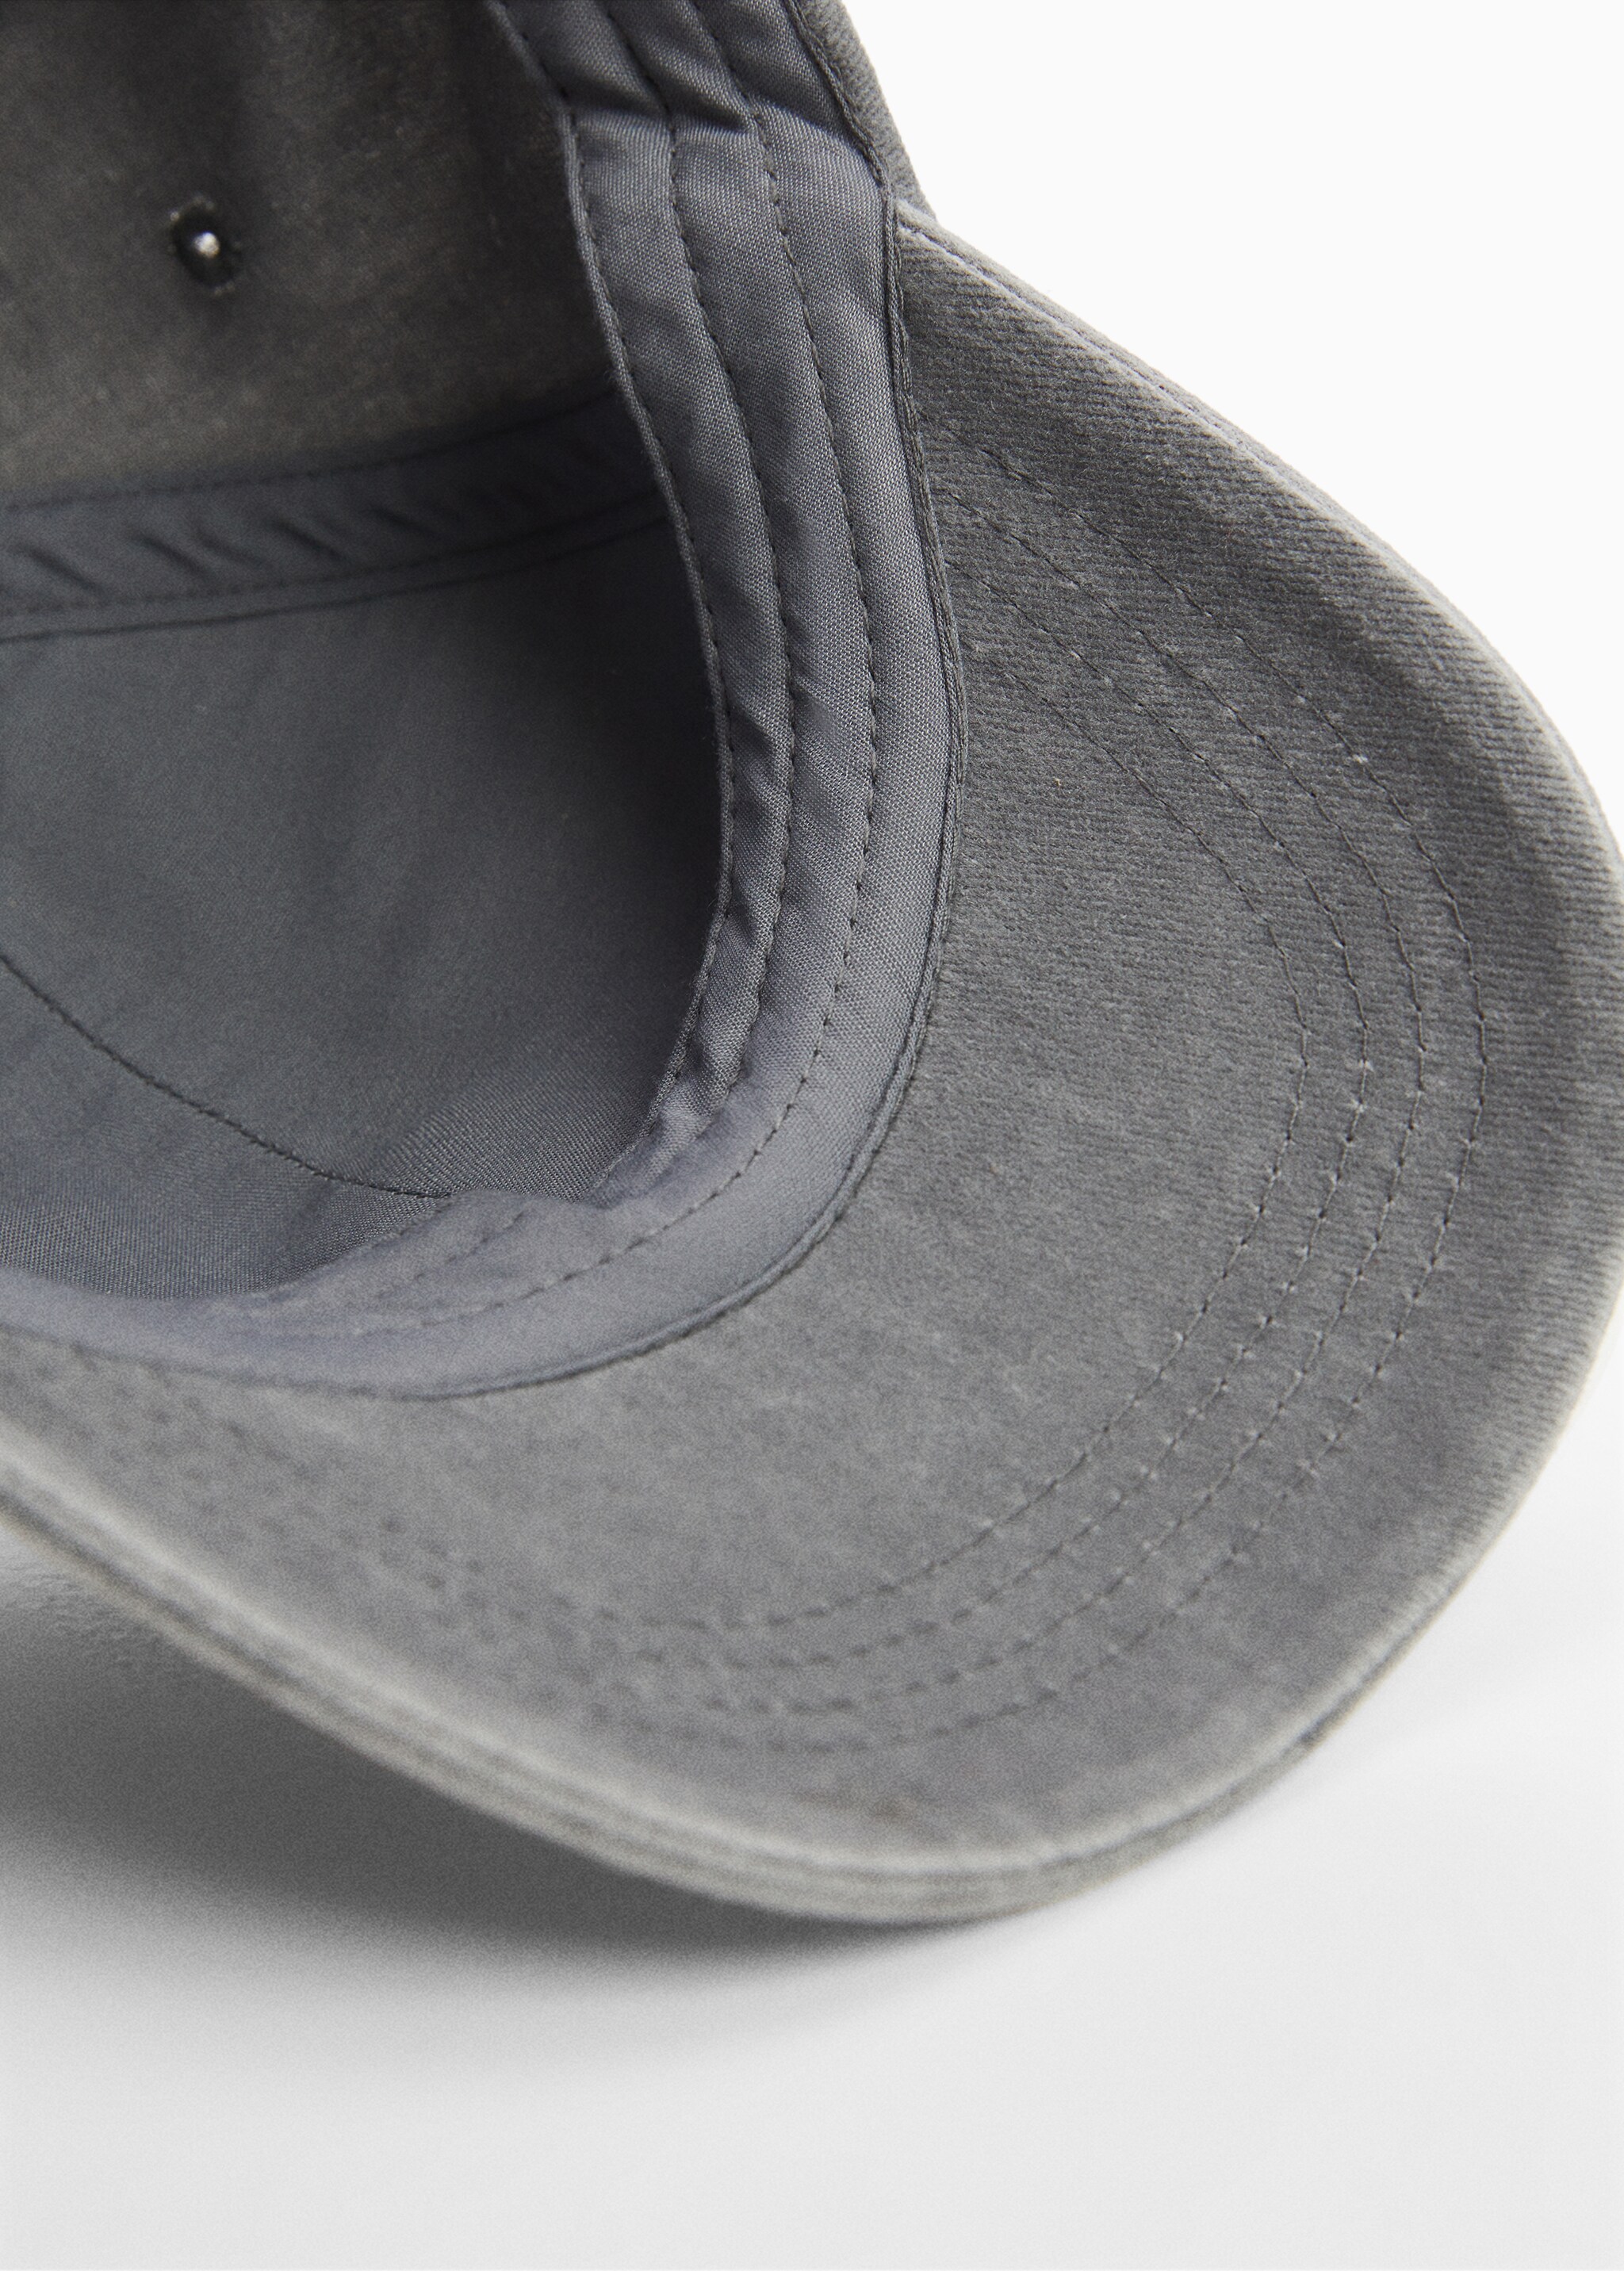 Embroidered detail cap - Details of the article 2